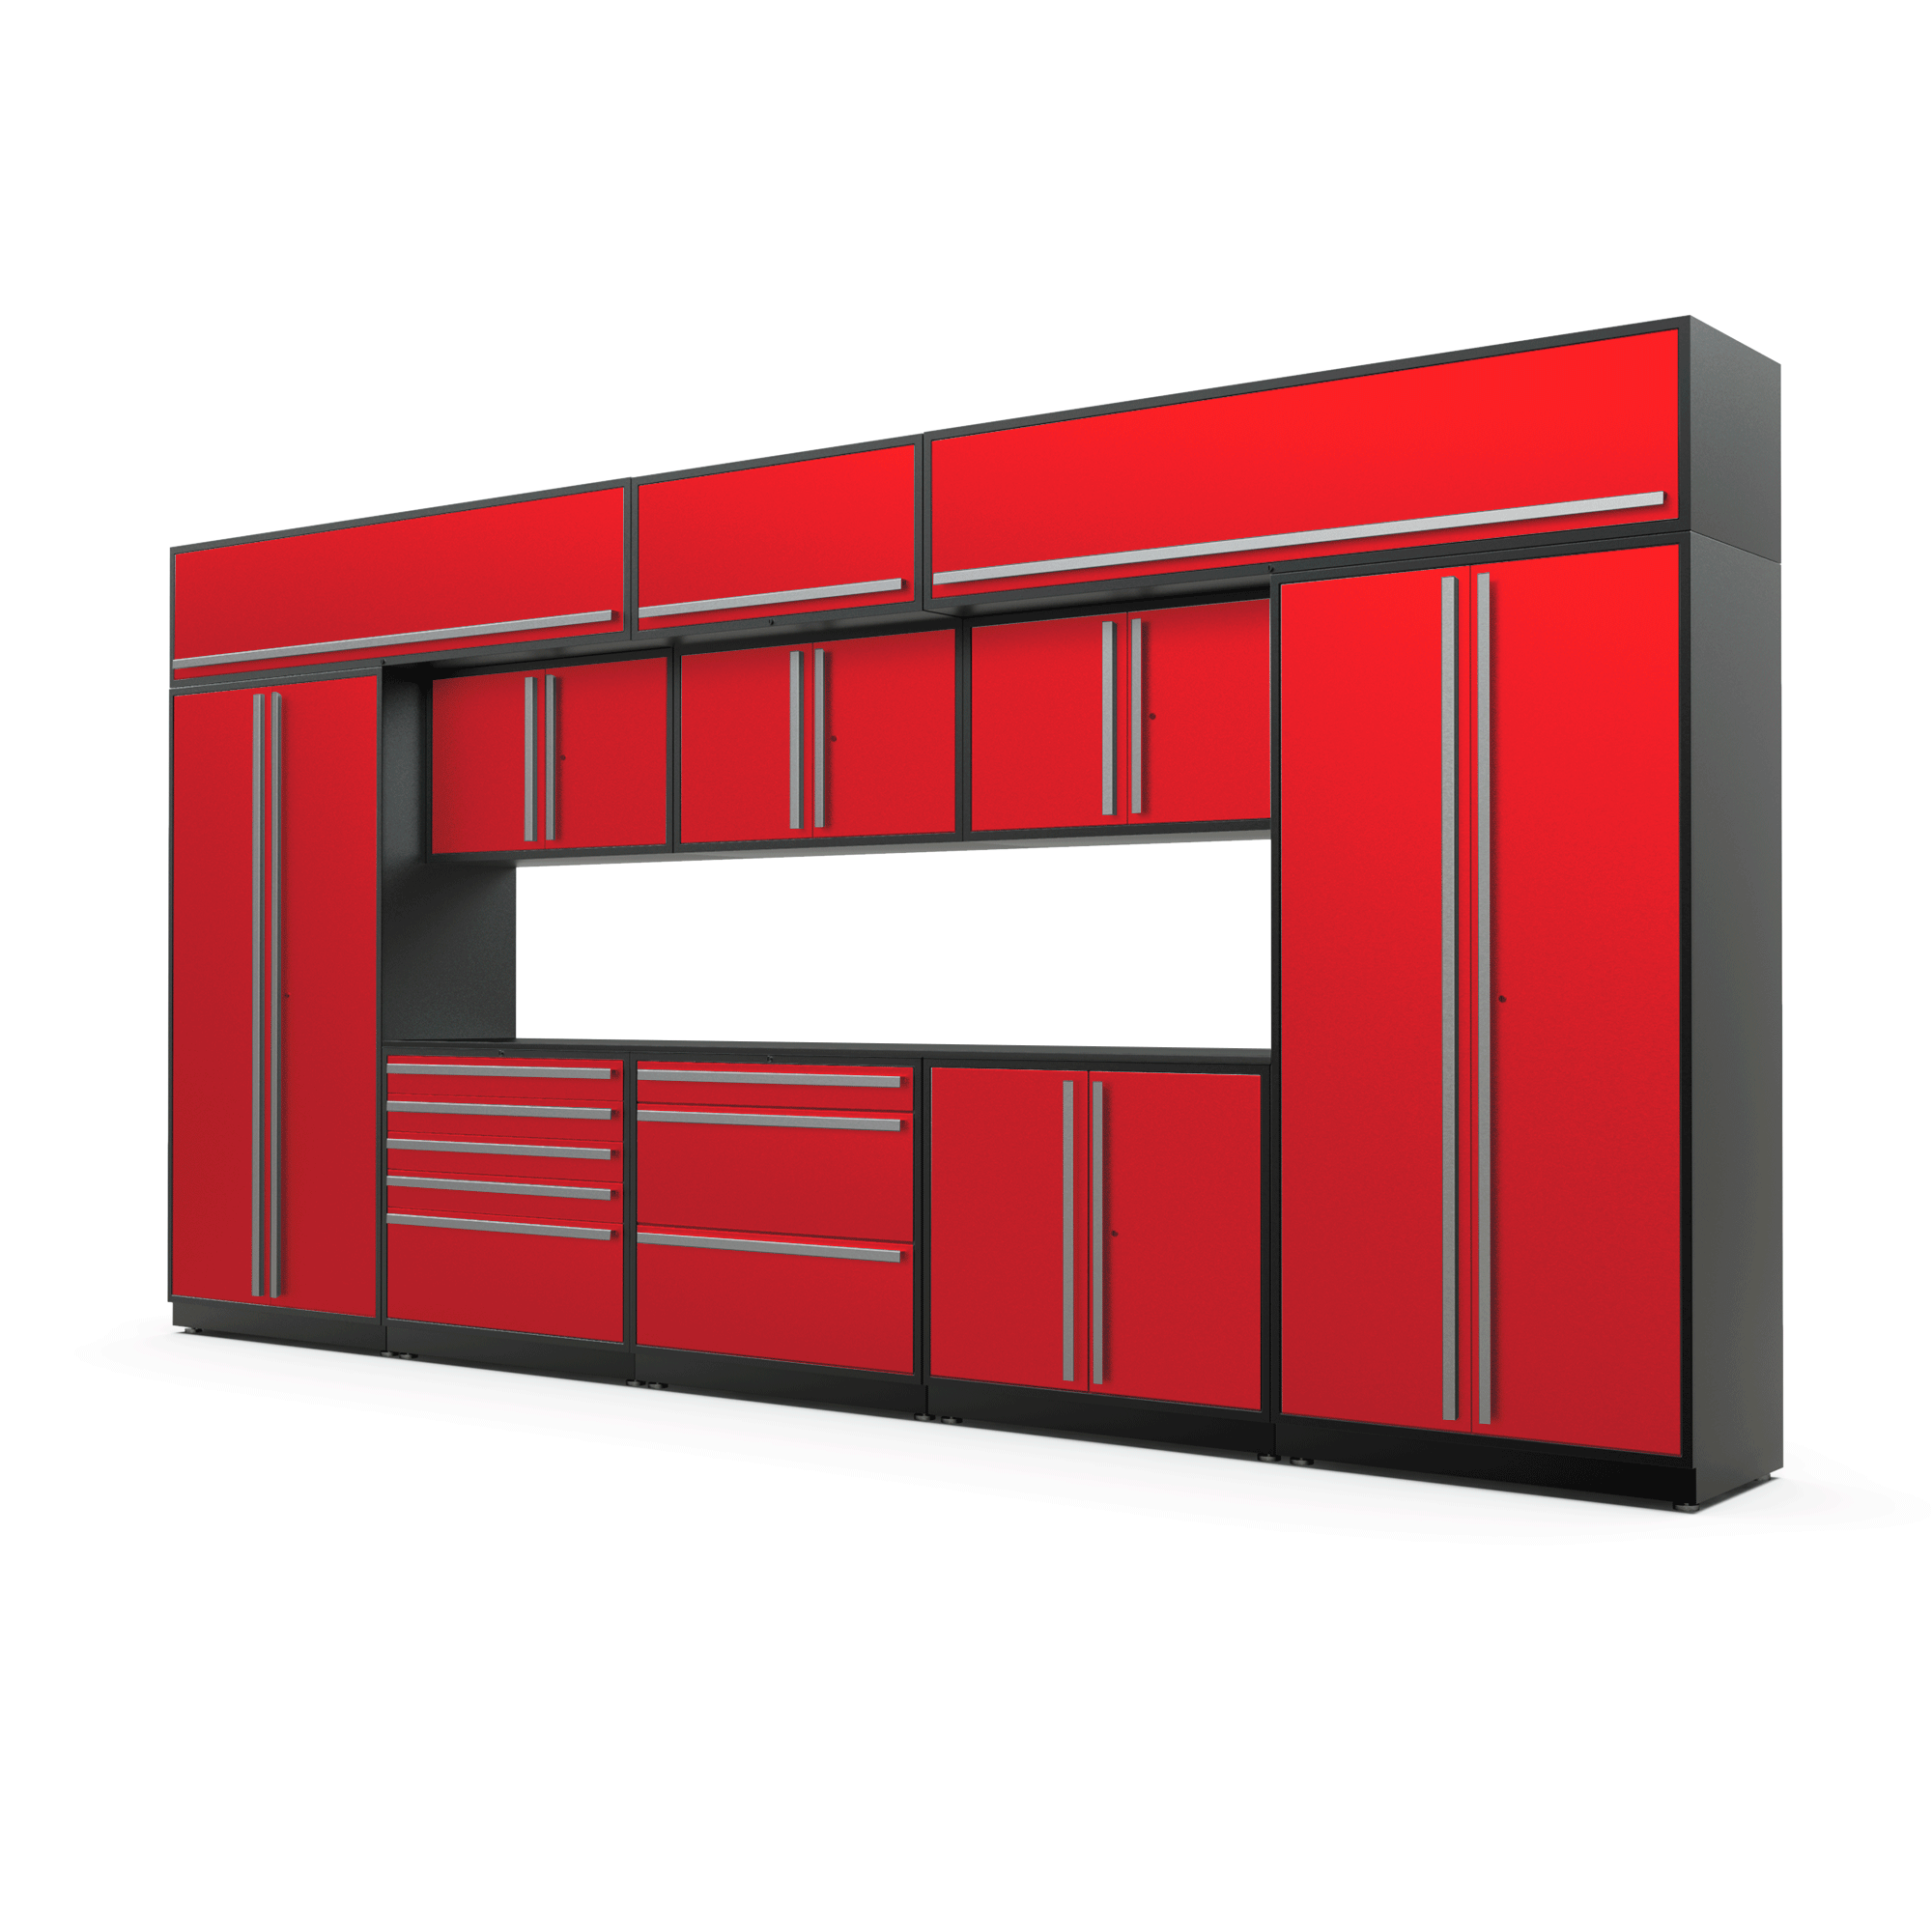 Proslat FusionPlus 16 ft set - MAX - Overheads - Red /